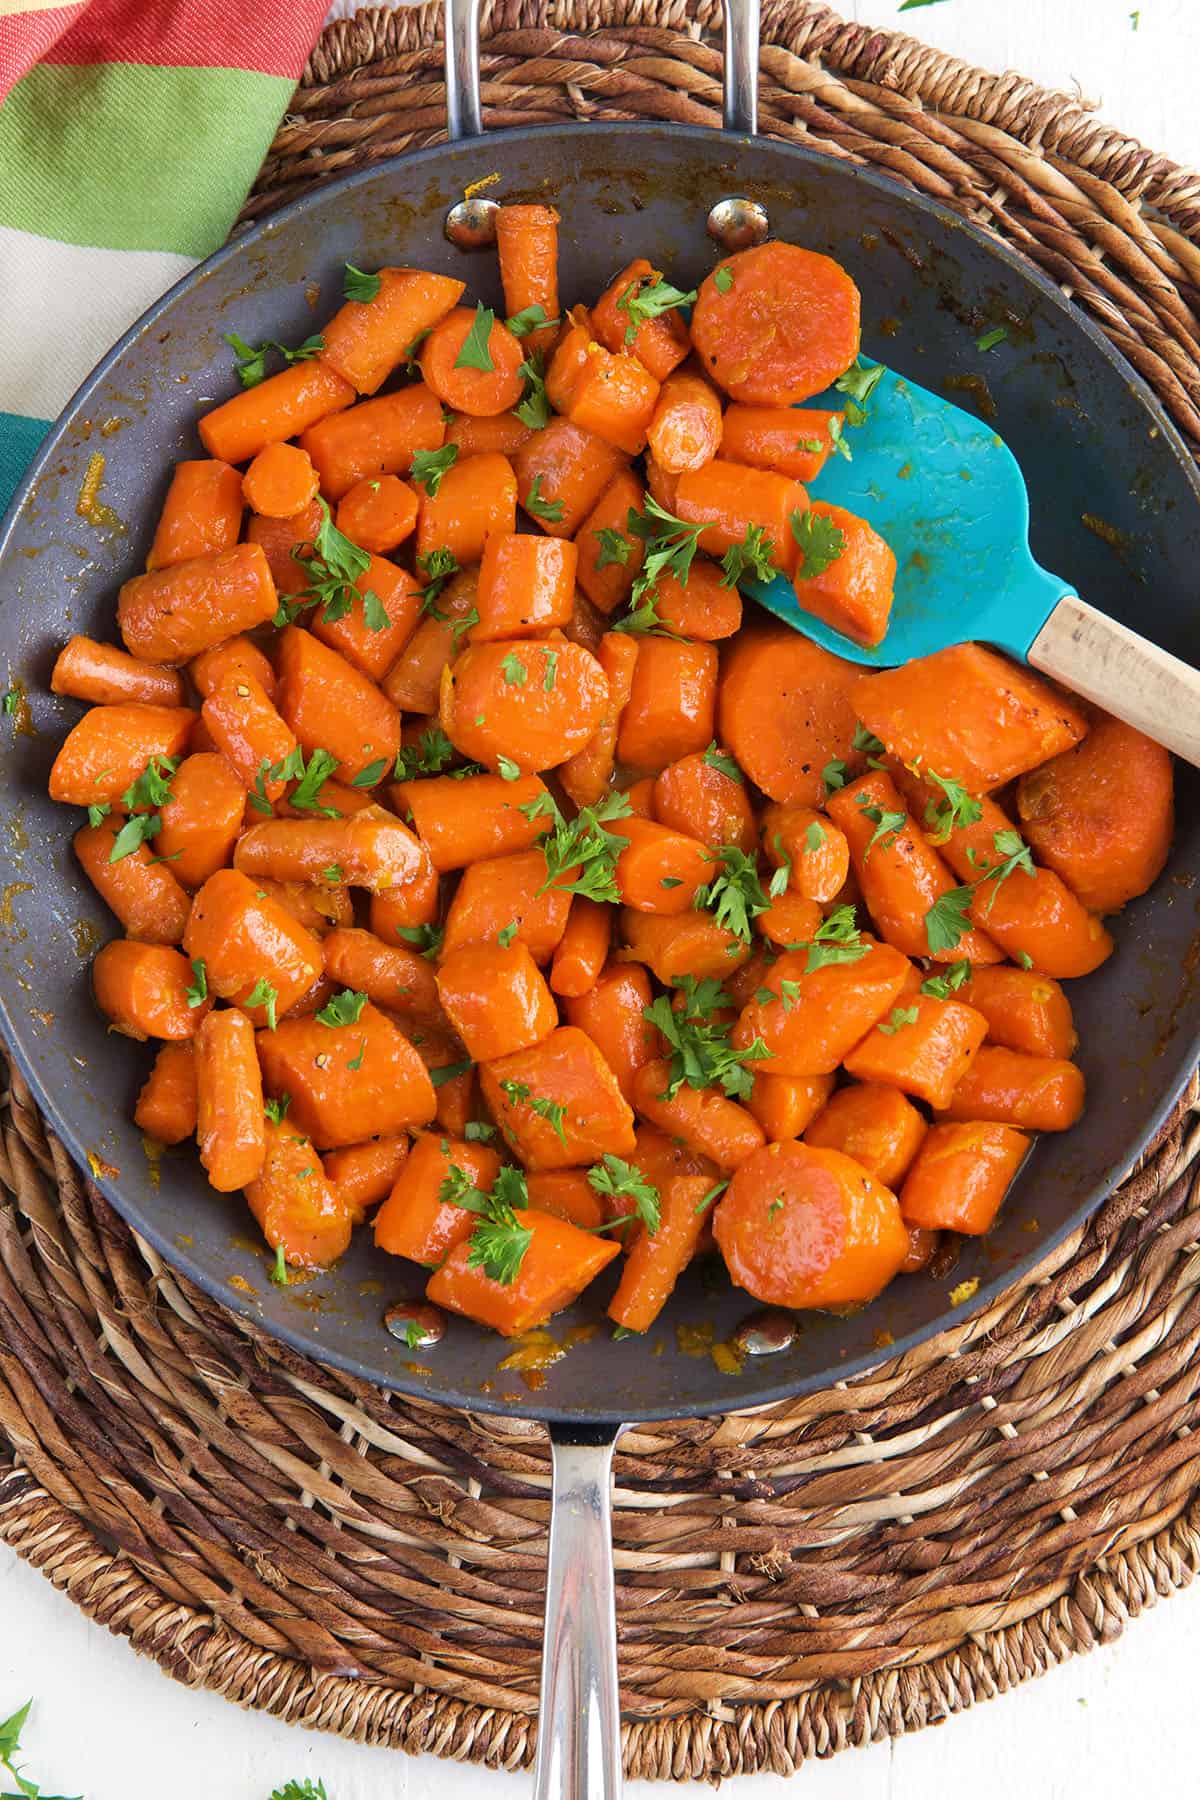 A skillet is filled with cooked carrots.